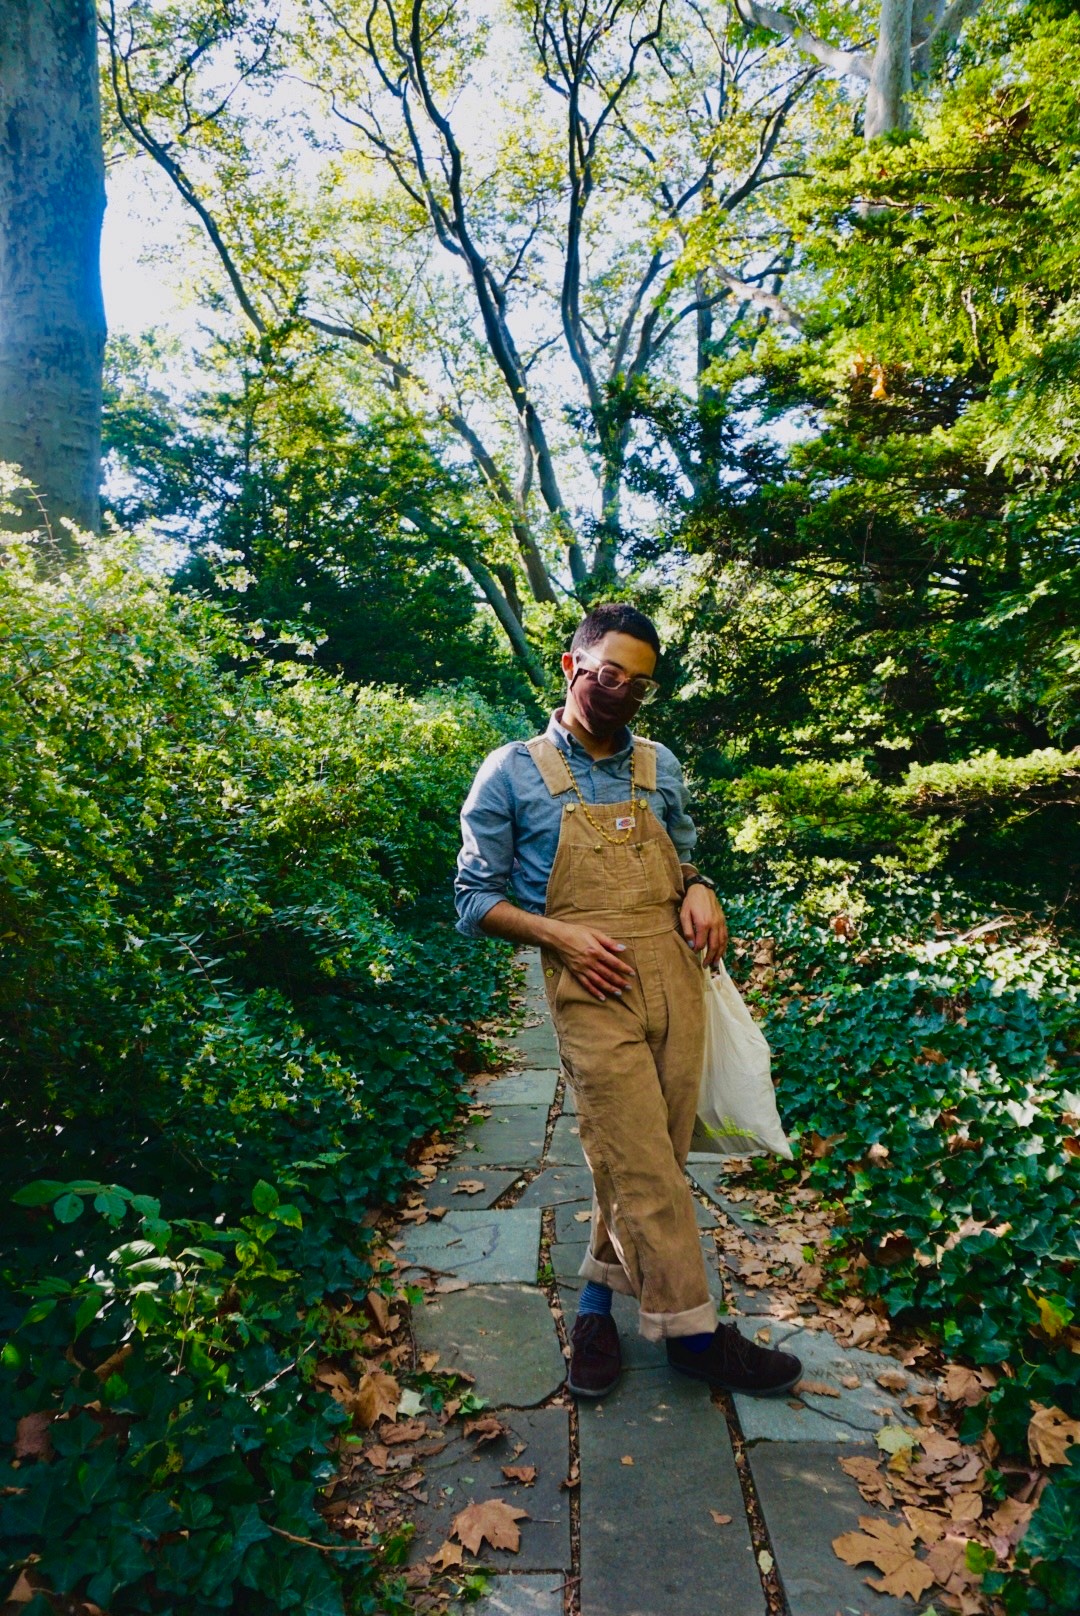 A queer brown person wearing tan courderoy overalls, mask, and pink glasses poses with one leg crossed over the other. They stand on a gray stone path littered with leaves and surrounded by greenery and branches. 